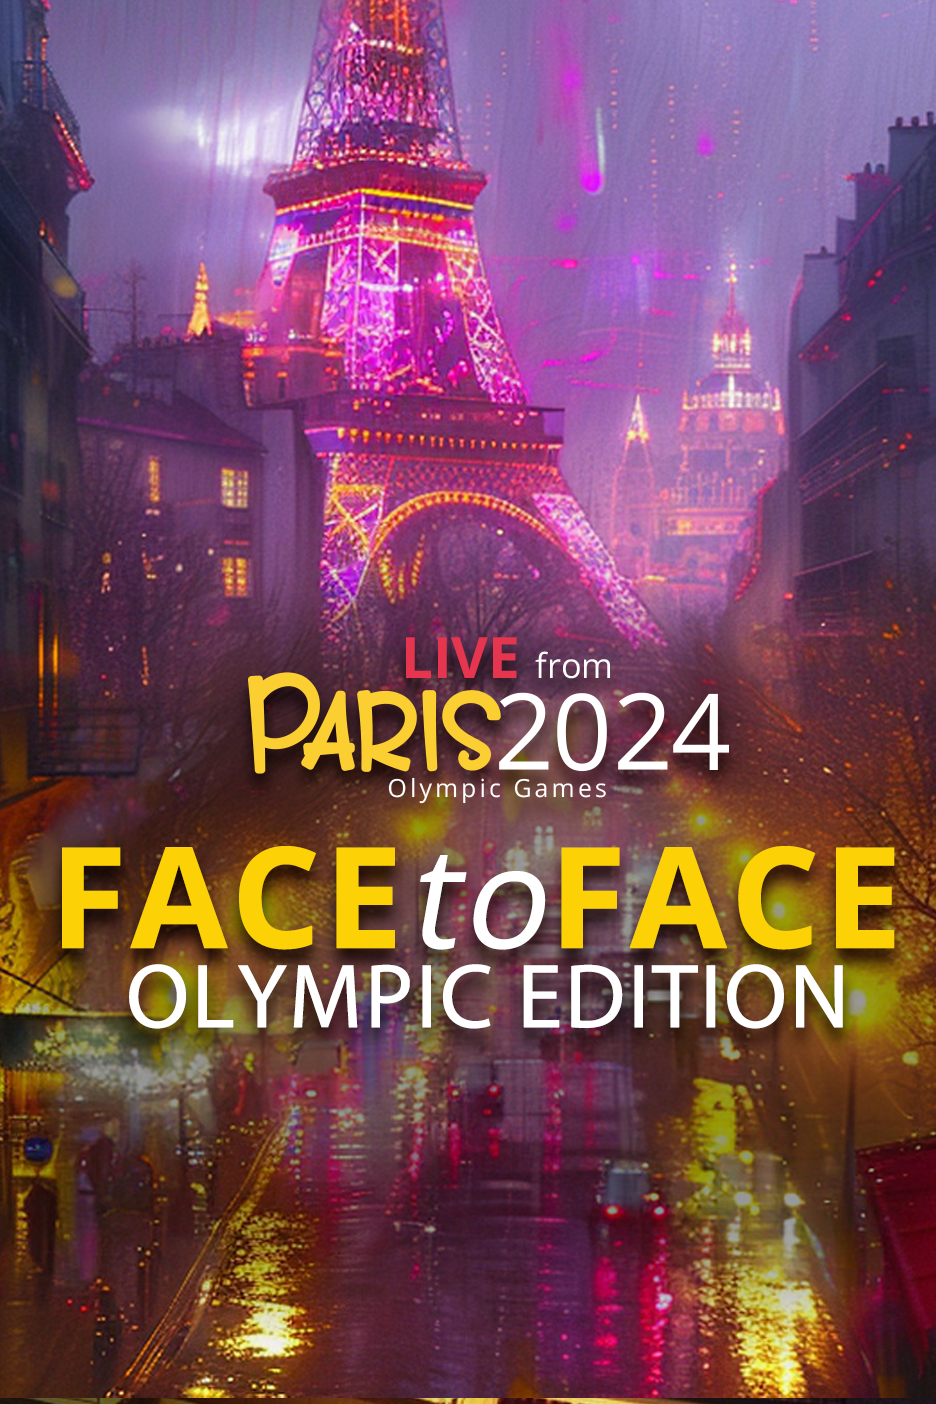 Face to Face - Olympic Edition